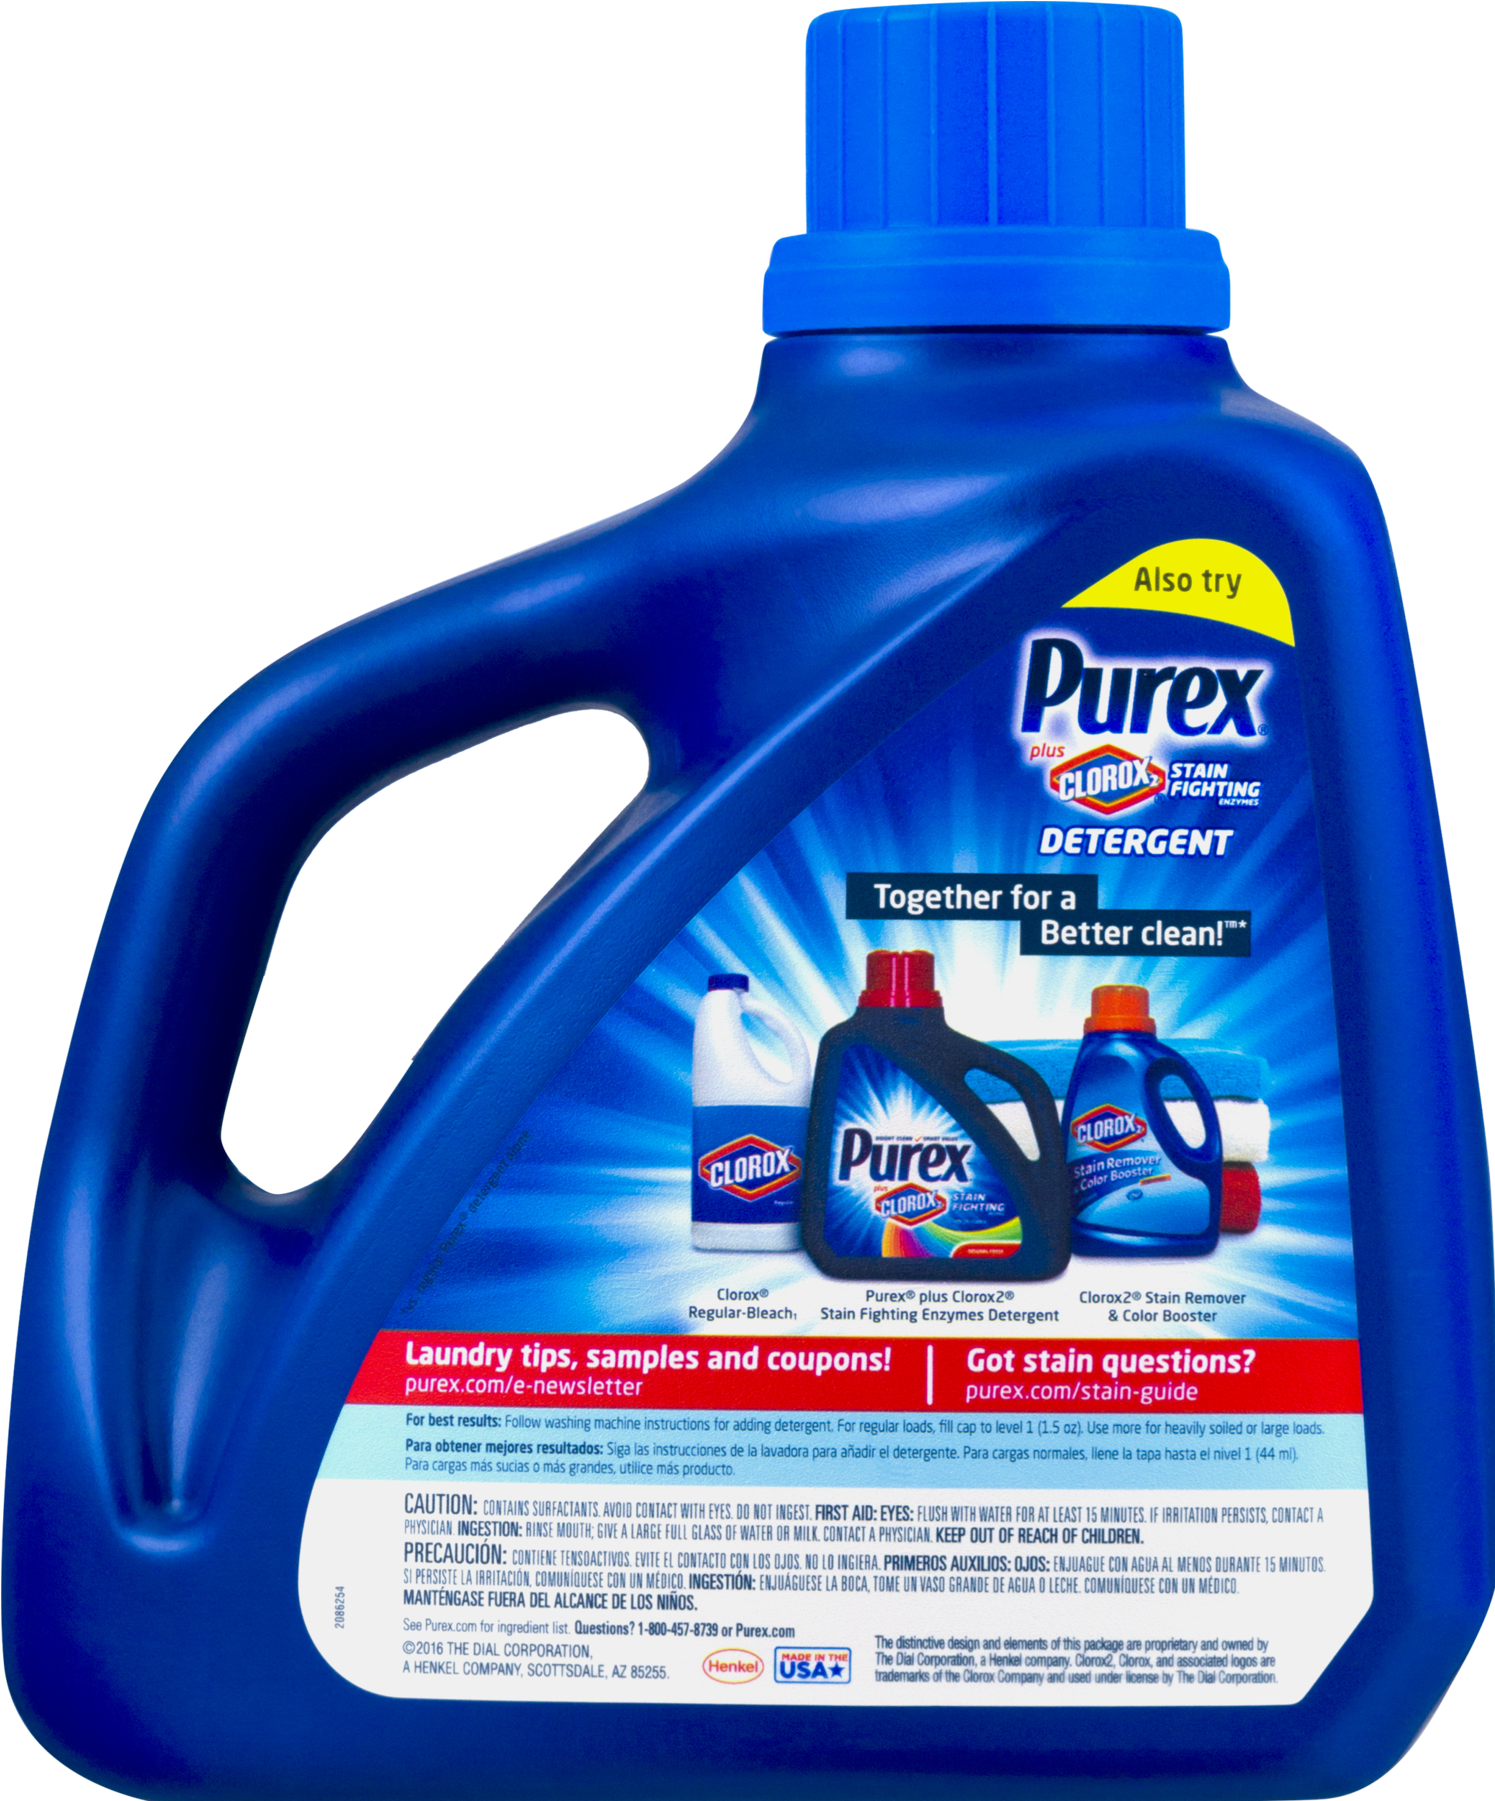 Download Purex Liquid Laundry Detergent After The Rain 150 Purex Dirt Lift Action Fabulously Fresh Laundry Detergent Png Image With No Background Pngkey Com